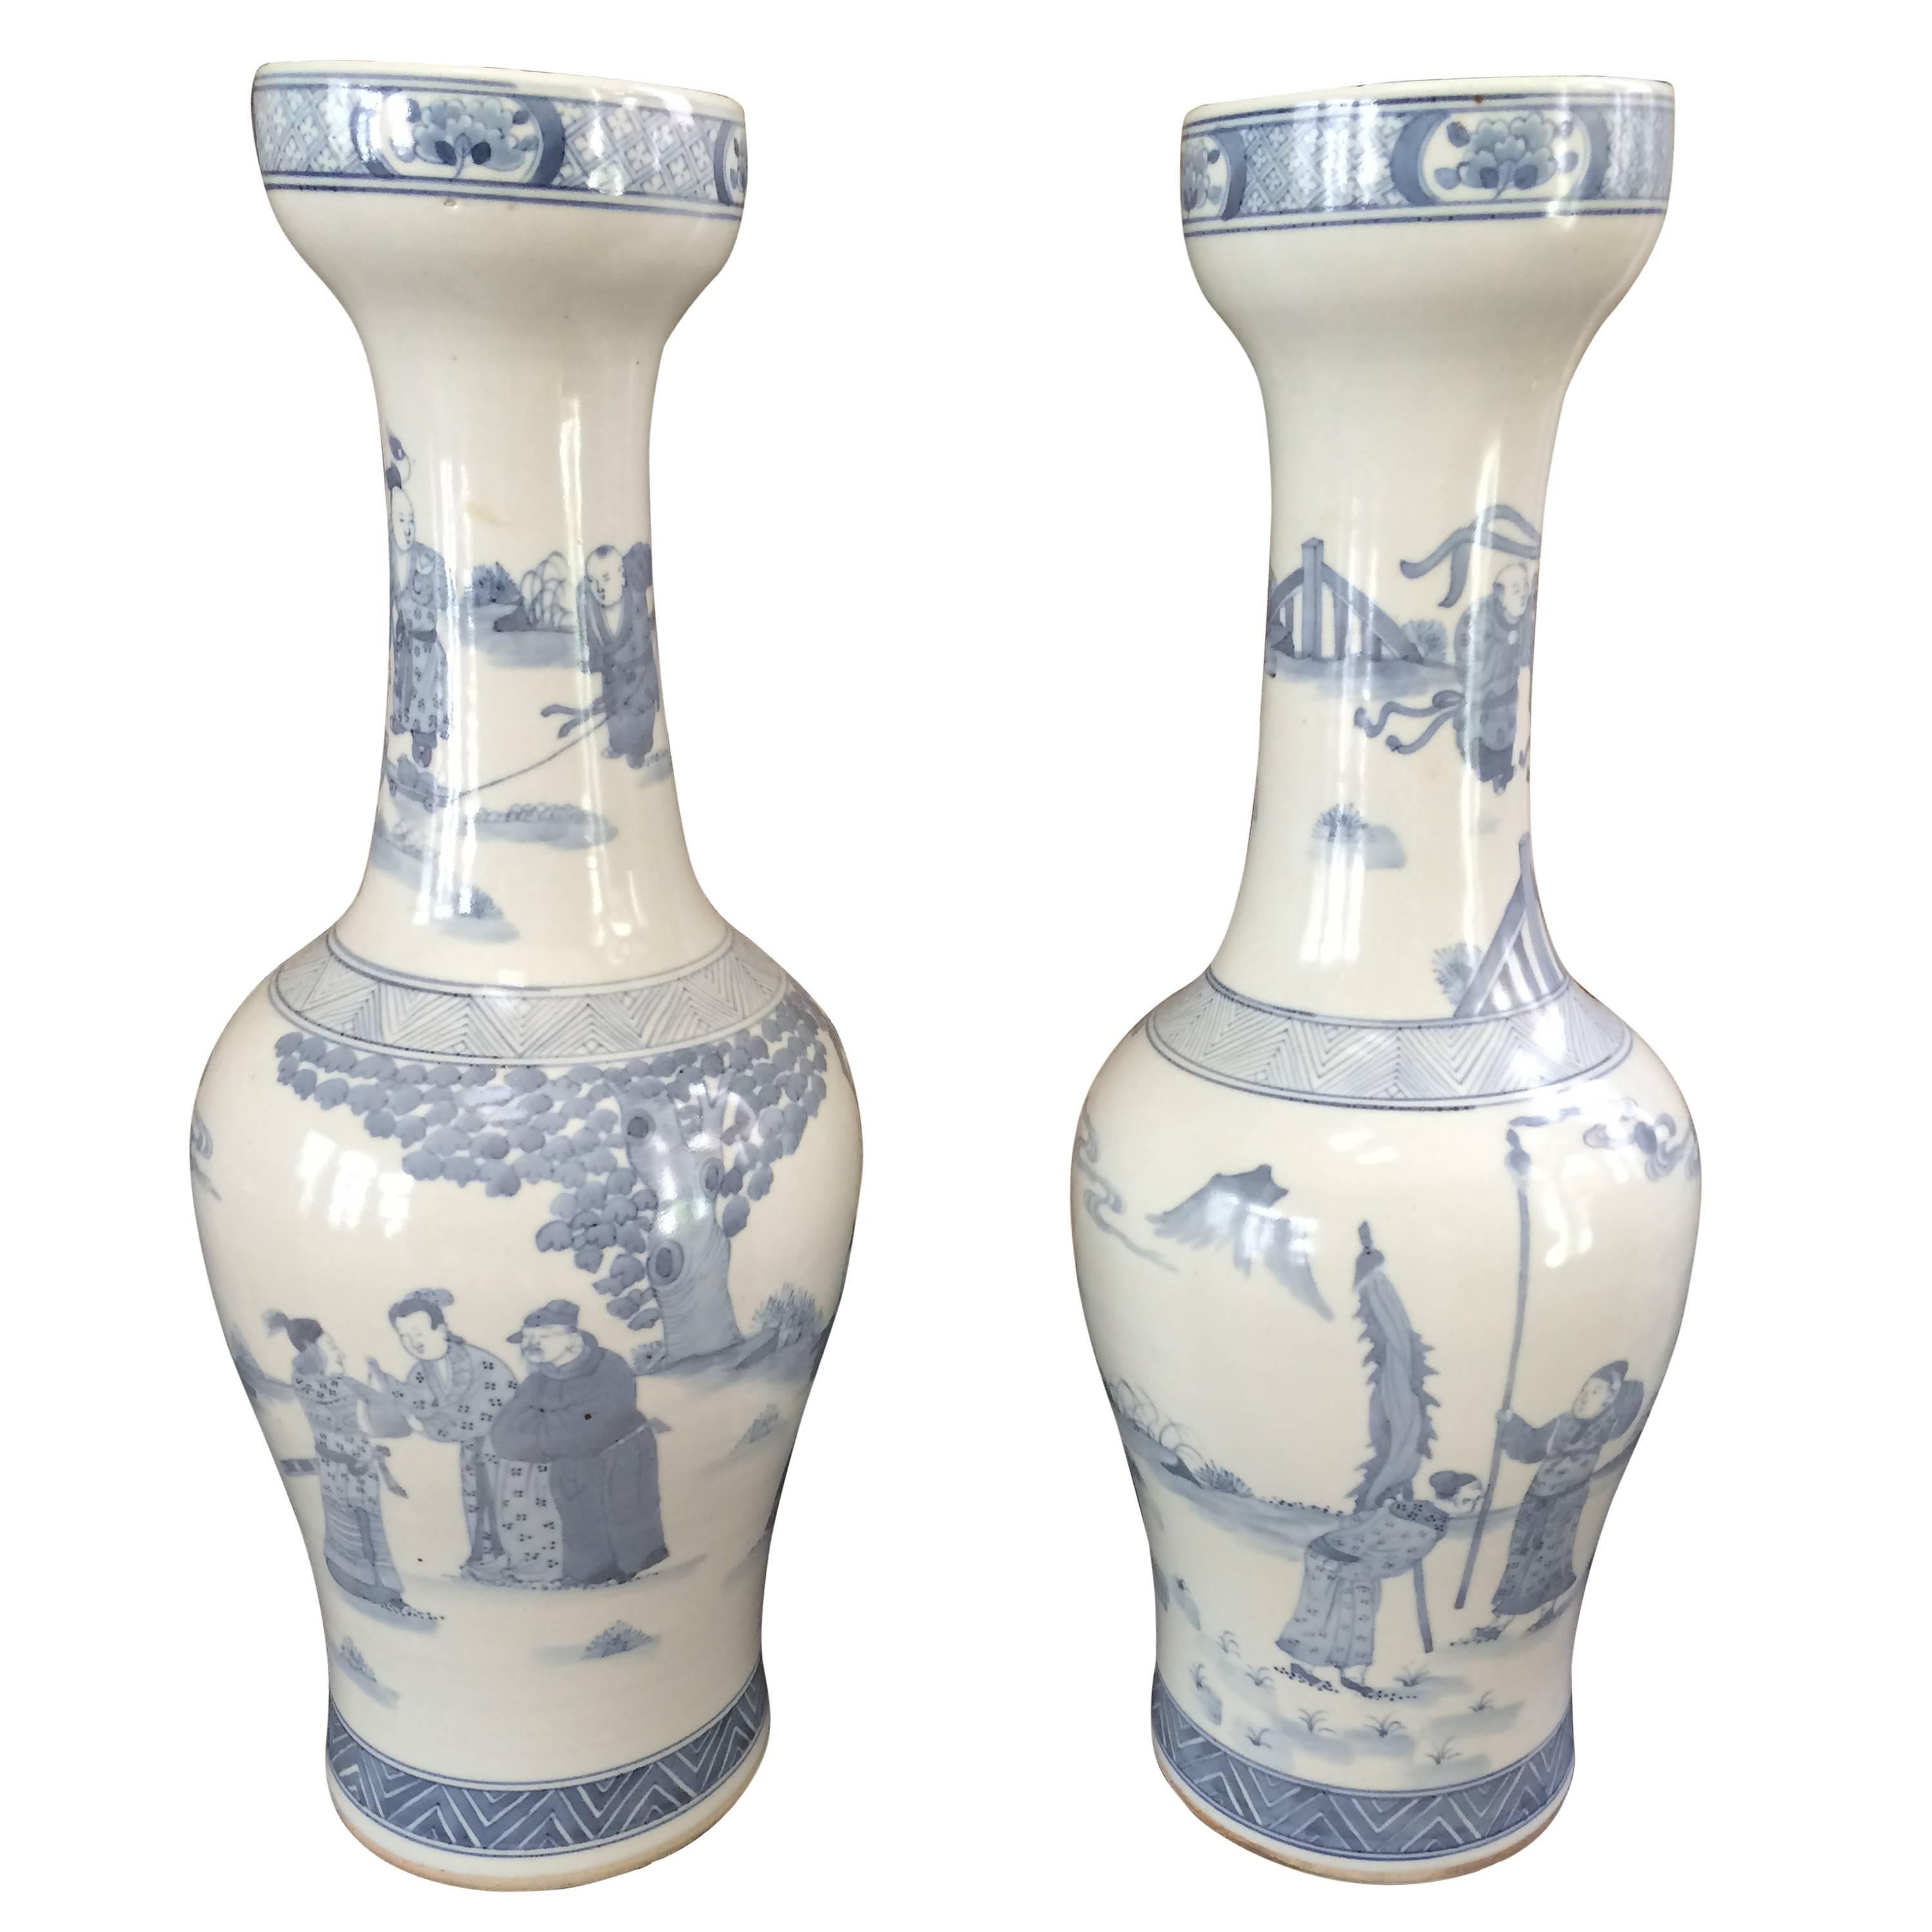 Unusual Pair of Chinese Export Blue and White Vases